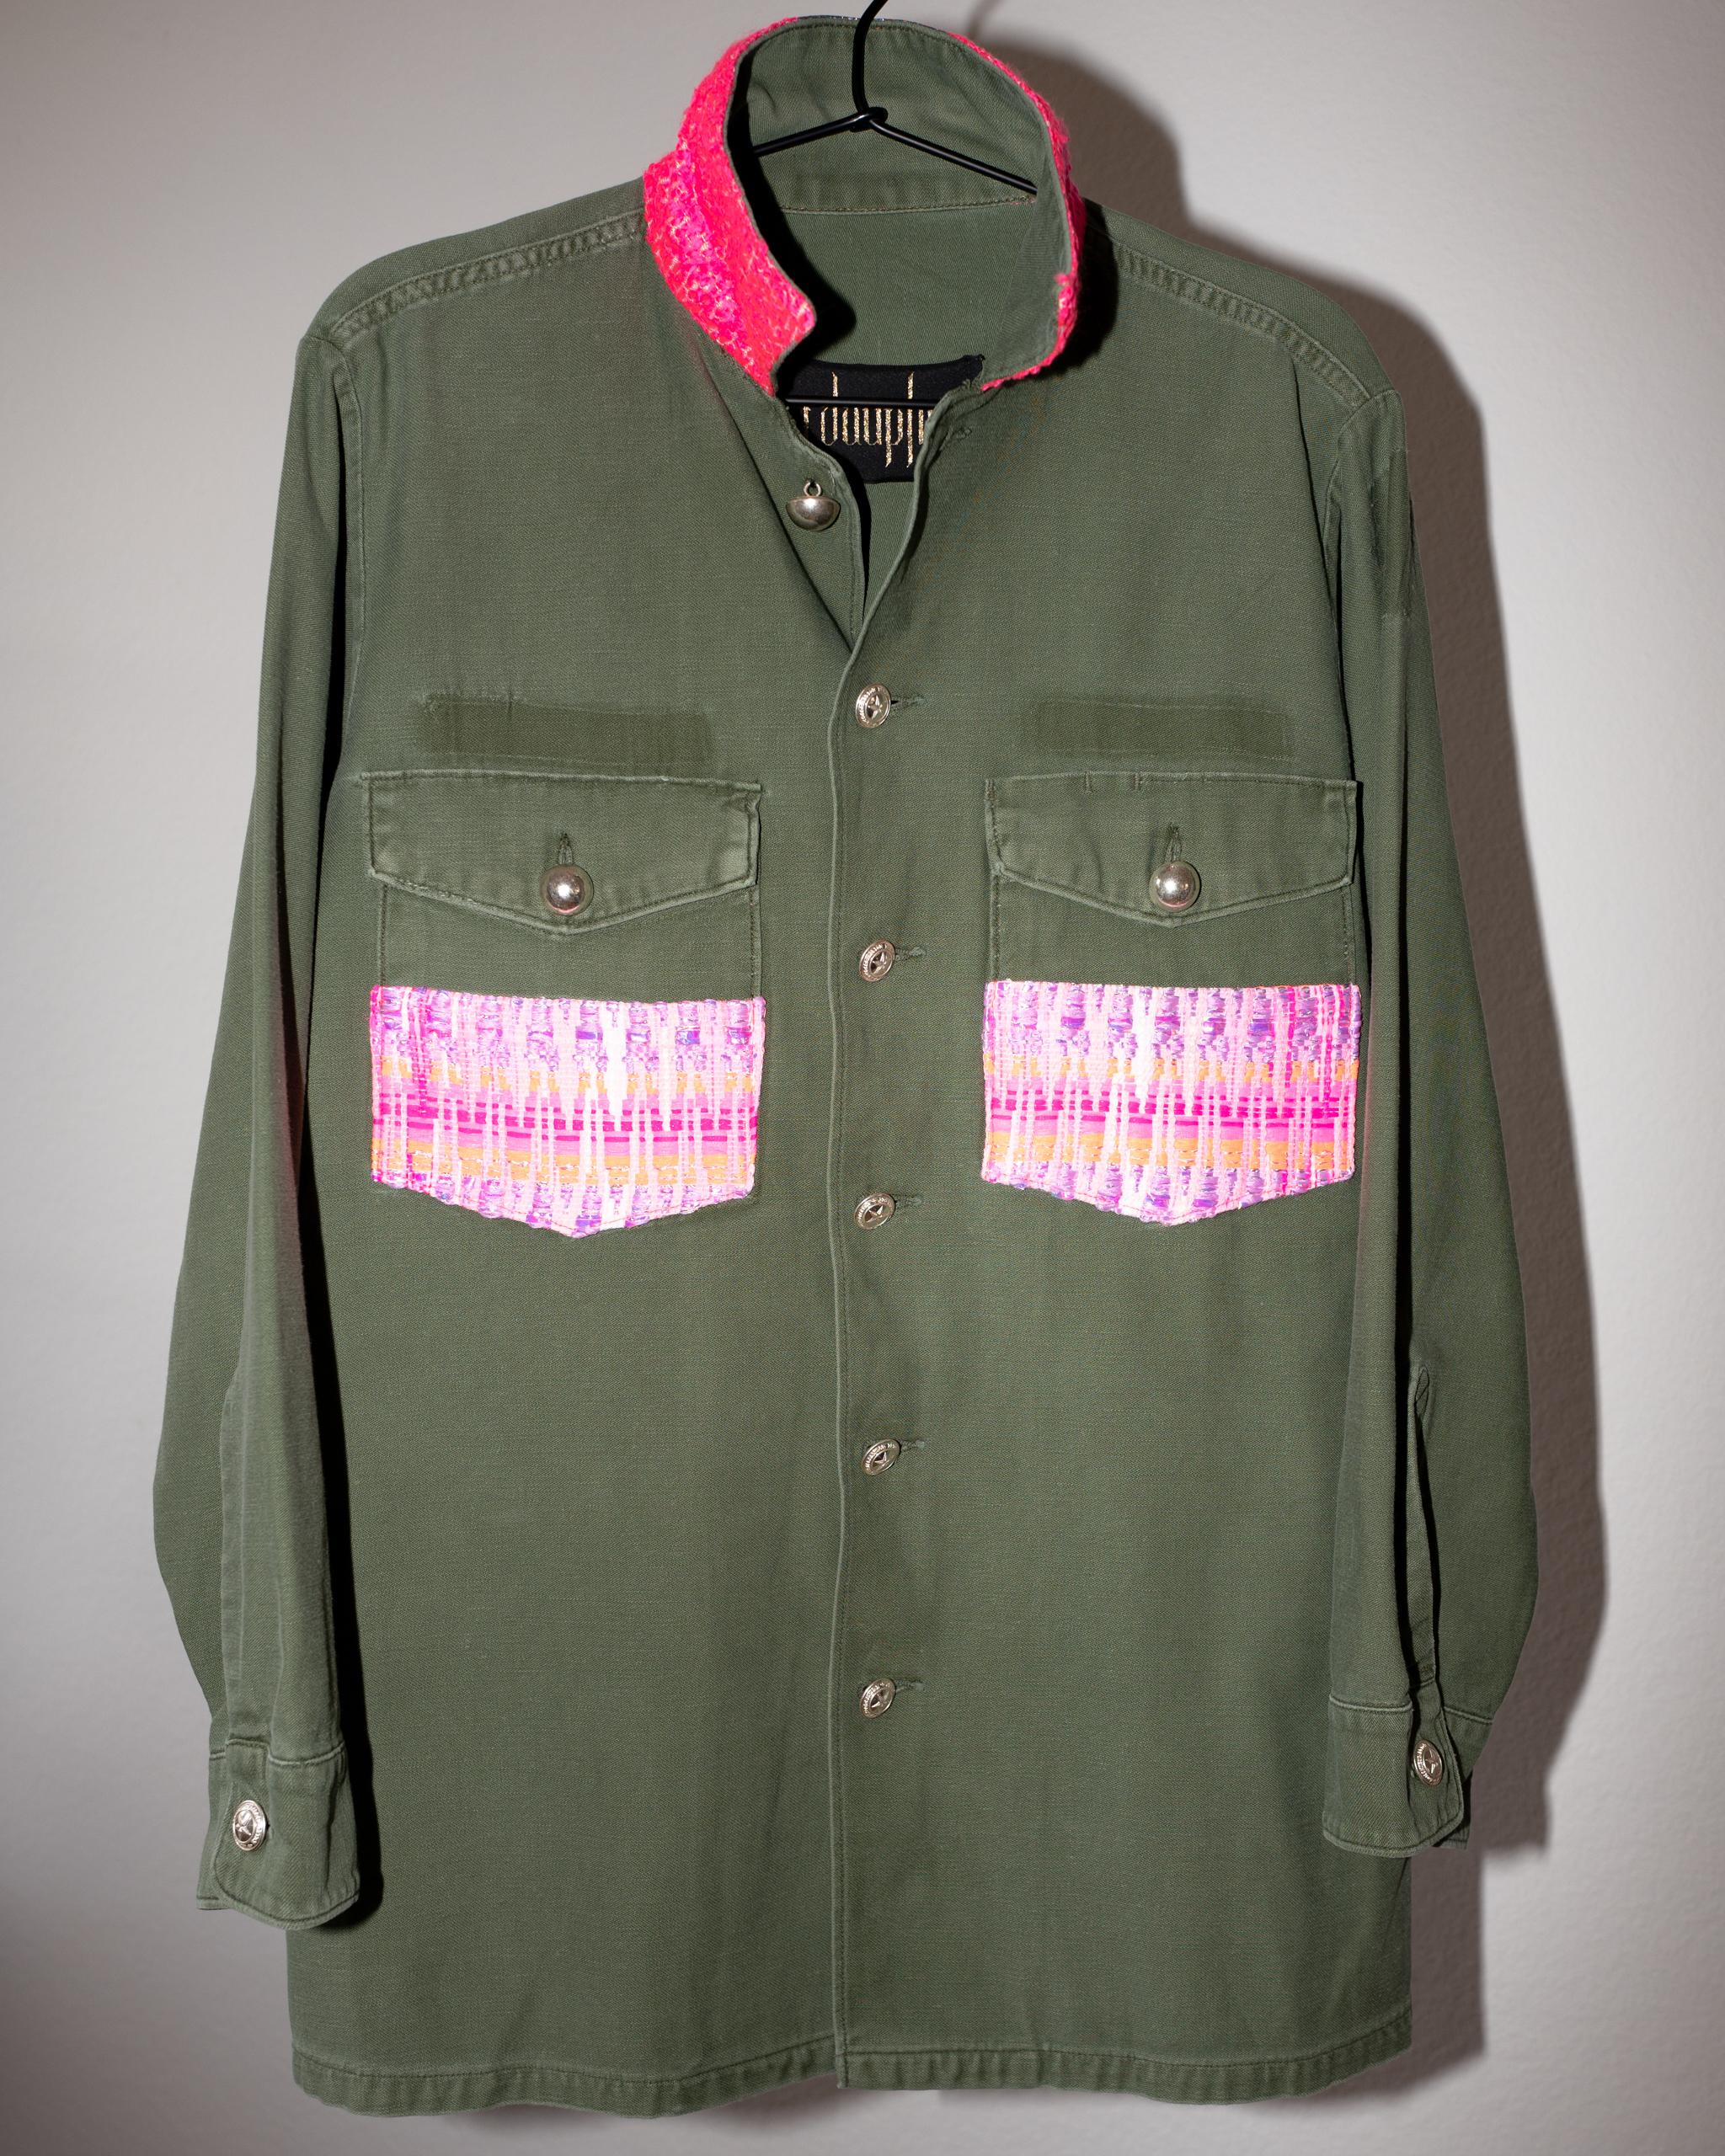 Neon Pink Pastel Tweed Pockets Remade Green US Military Vintage Jacket  For Sale 1